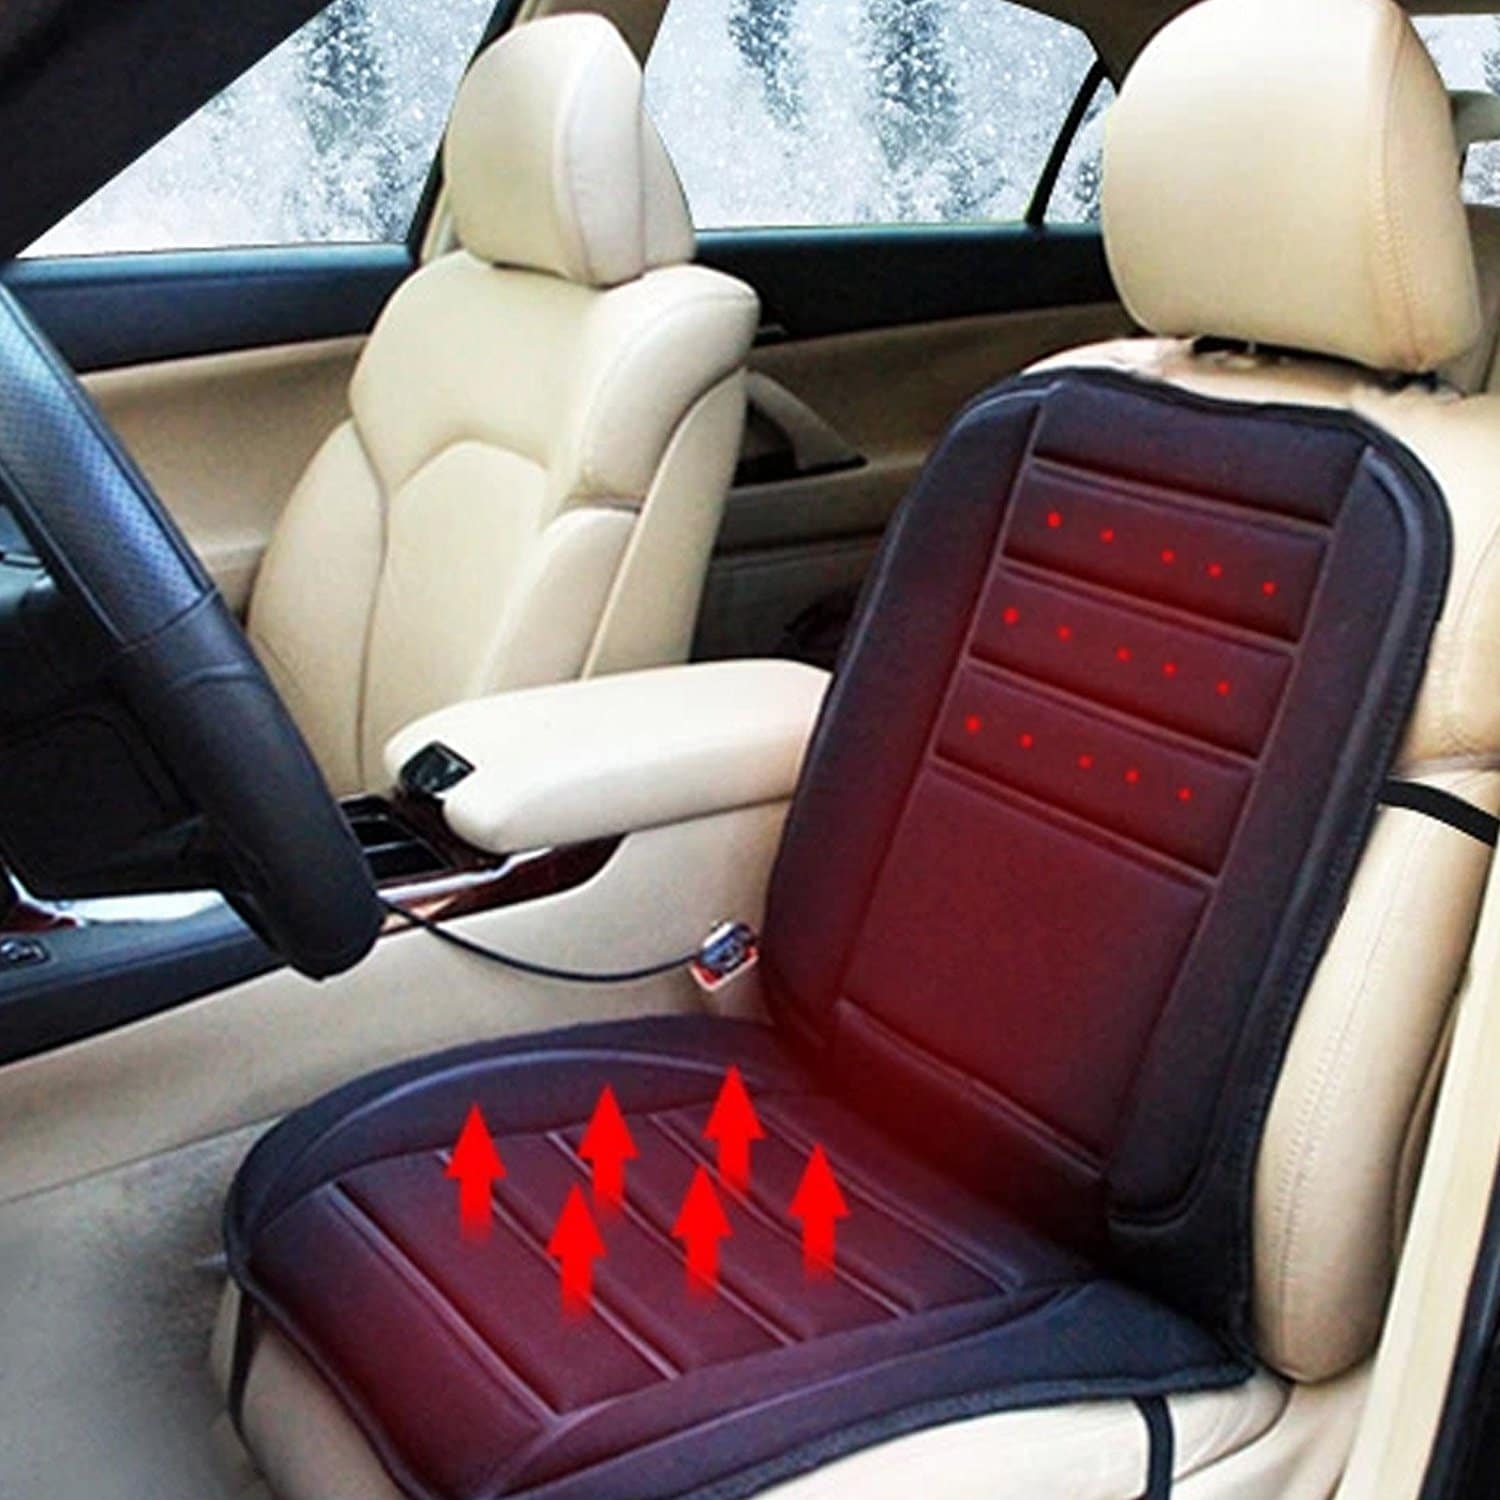 Review of Audew Car Front Seat Heated Pad Cushion